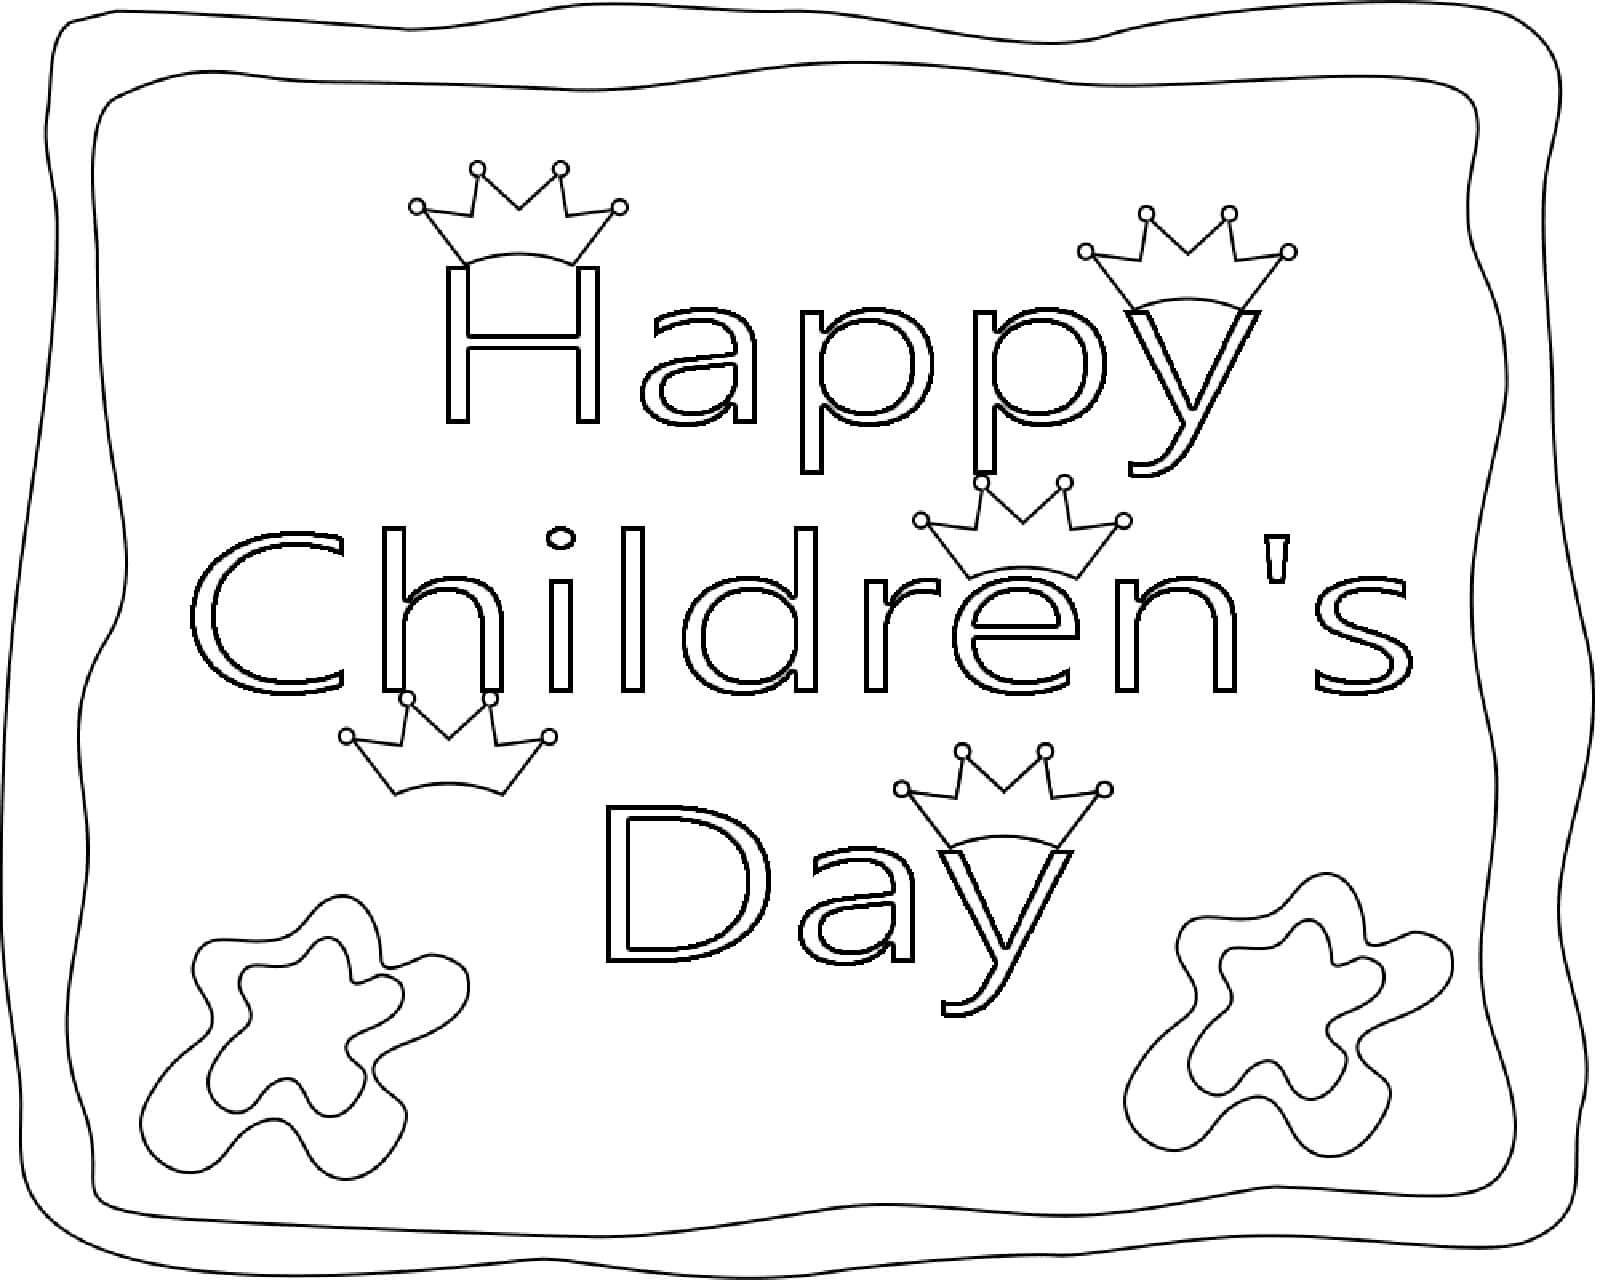 Children's Day Drawing / Children's Day Poster Drawing / Happy Children's  Day Drawing - YouTube